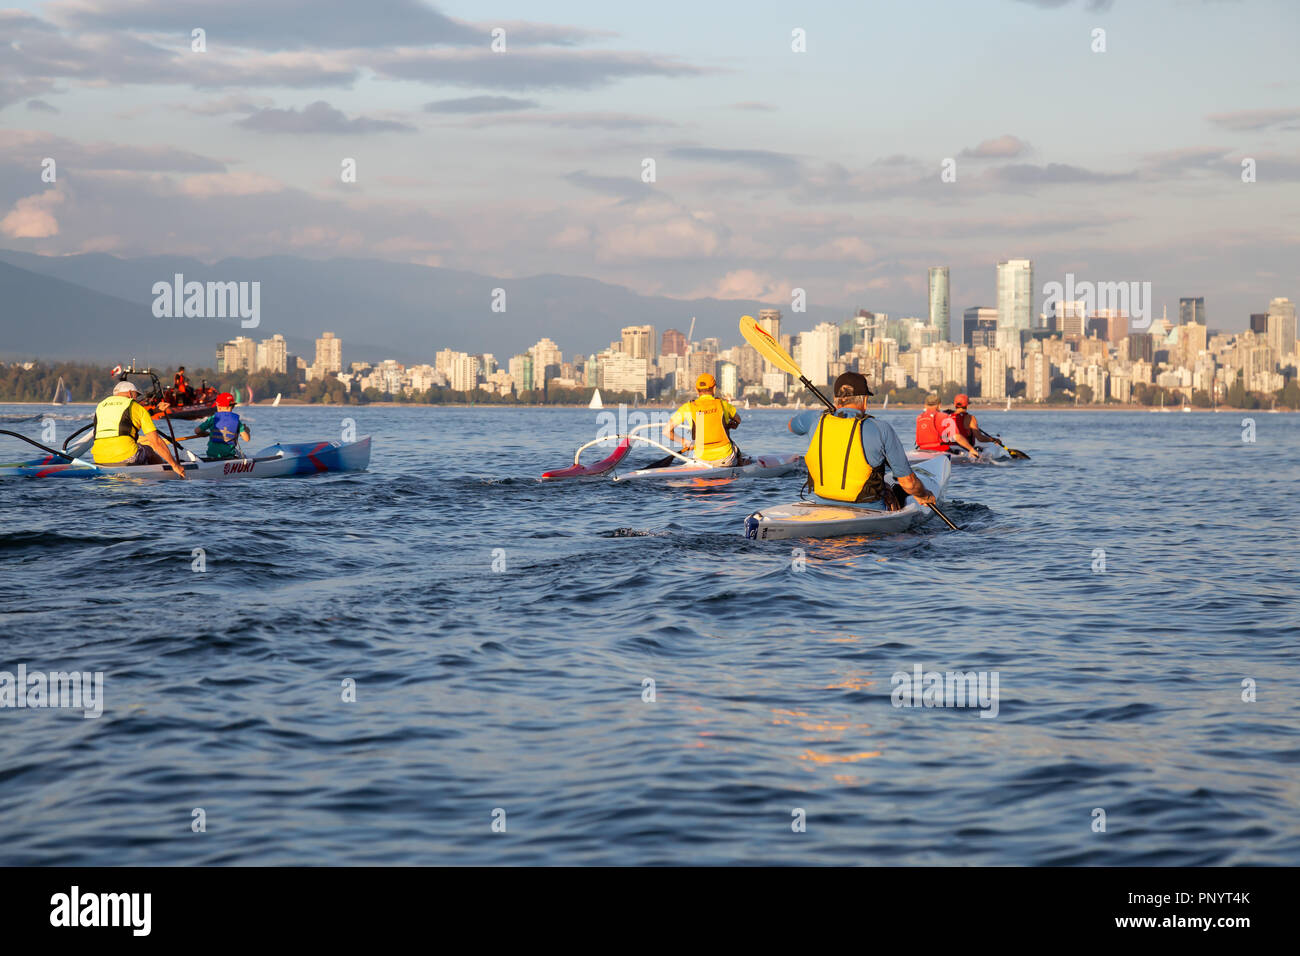 Vancouver, BC, Canada - August 30, 2018: People racing on Paddle Boards and Surf Ski during a vibrant summer sunset. Stock Photo